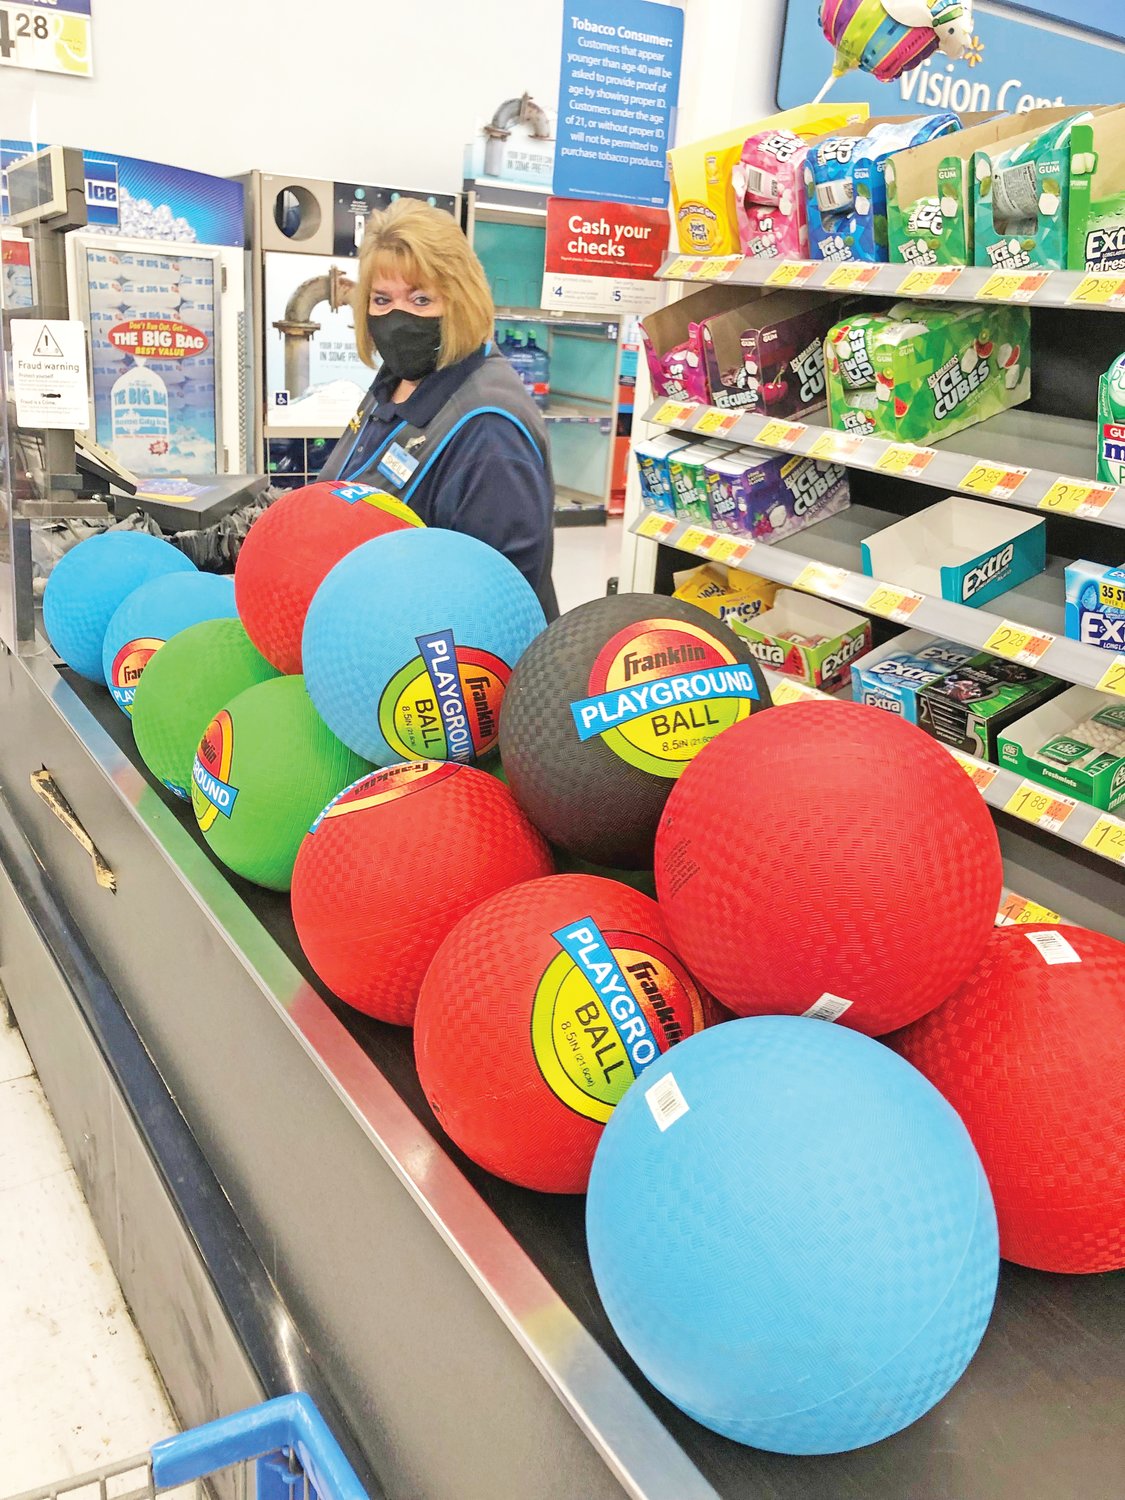 A Walmart cashier rings up playground balls donated by Wabash Avenue Presbyterian Church to Afghan refugees being housed at Camp Atterbury.